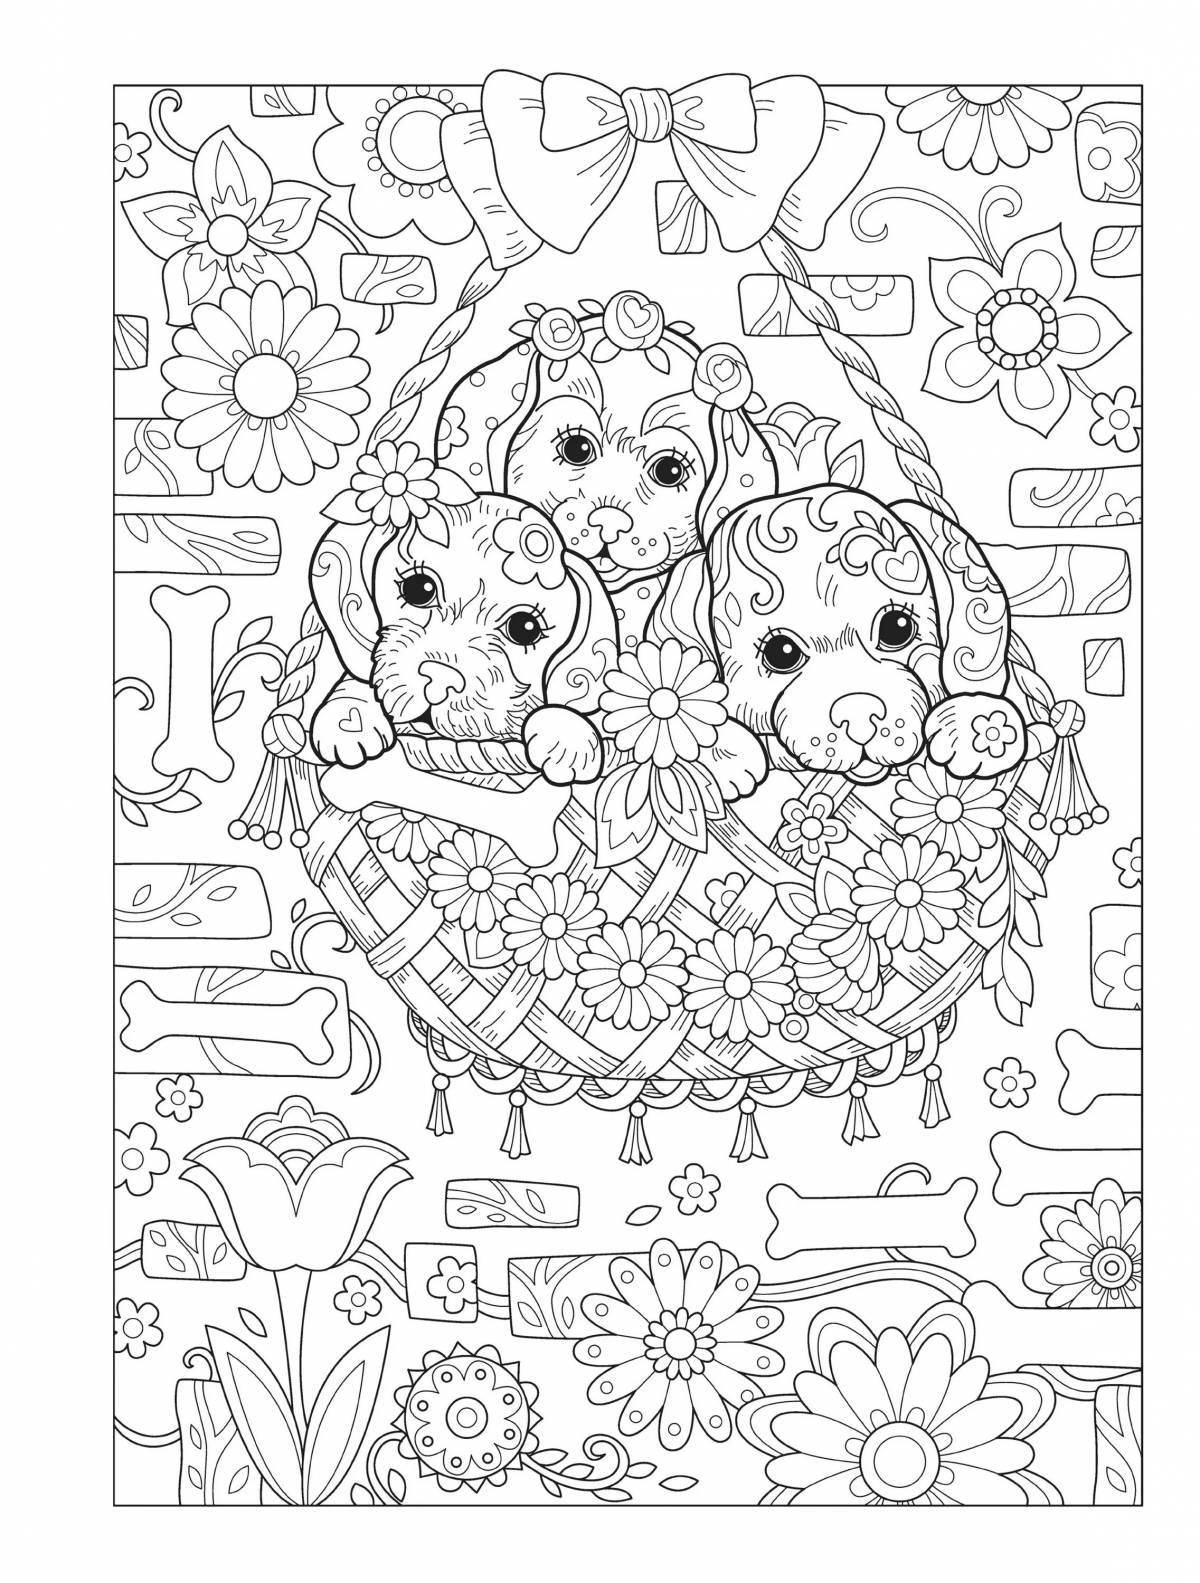 Letter-eater antistress coloring book